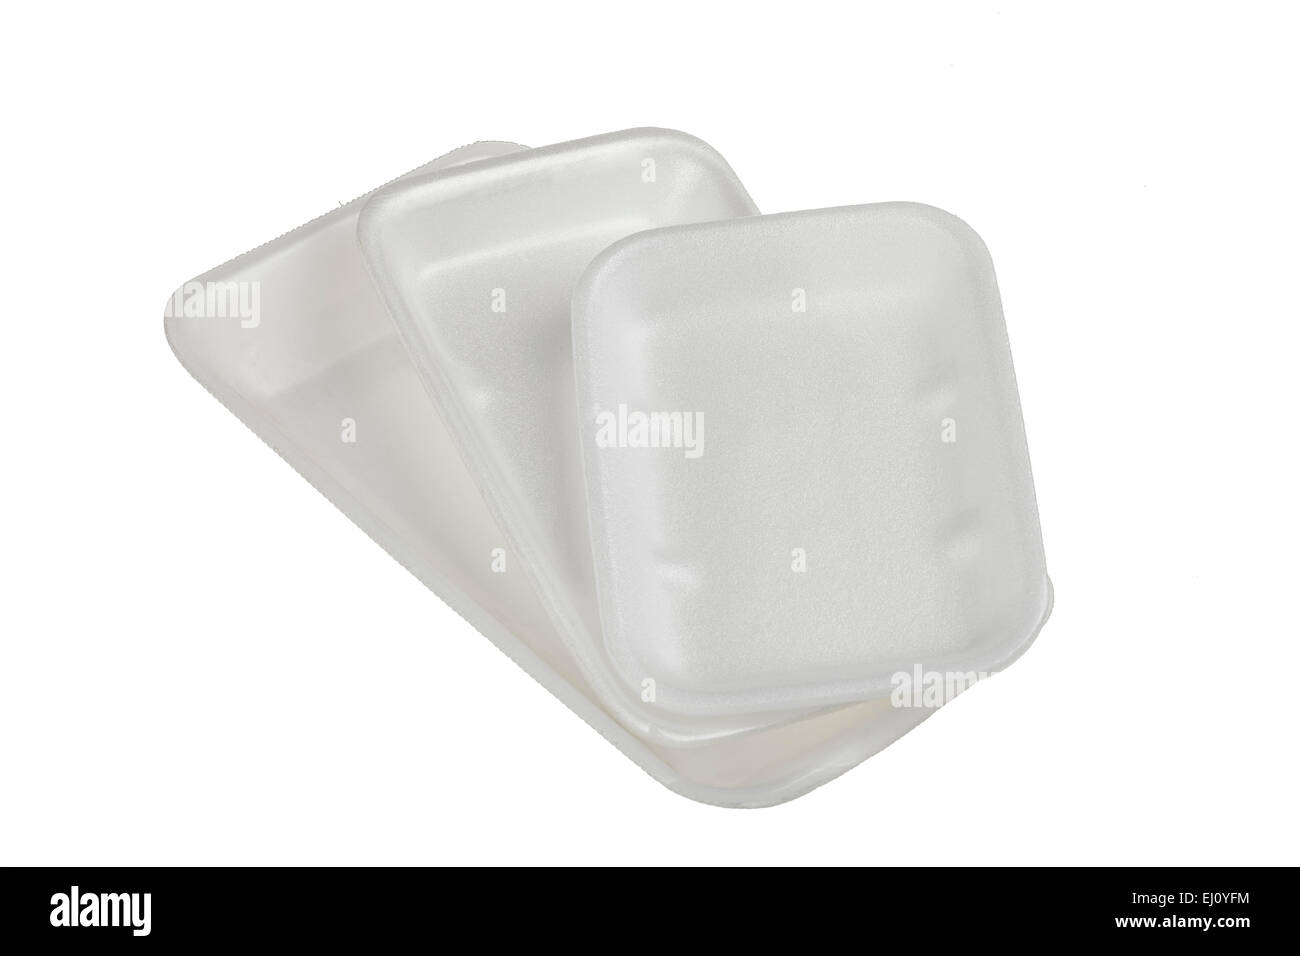 Styrofoam containers on white backgrounds Stock Photo